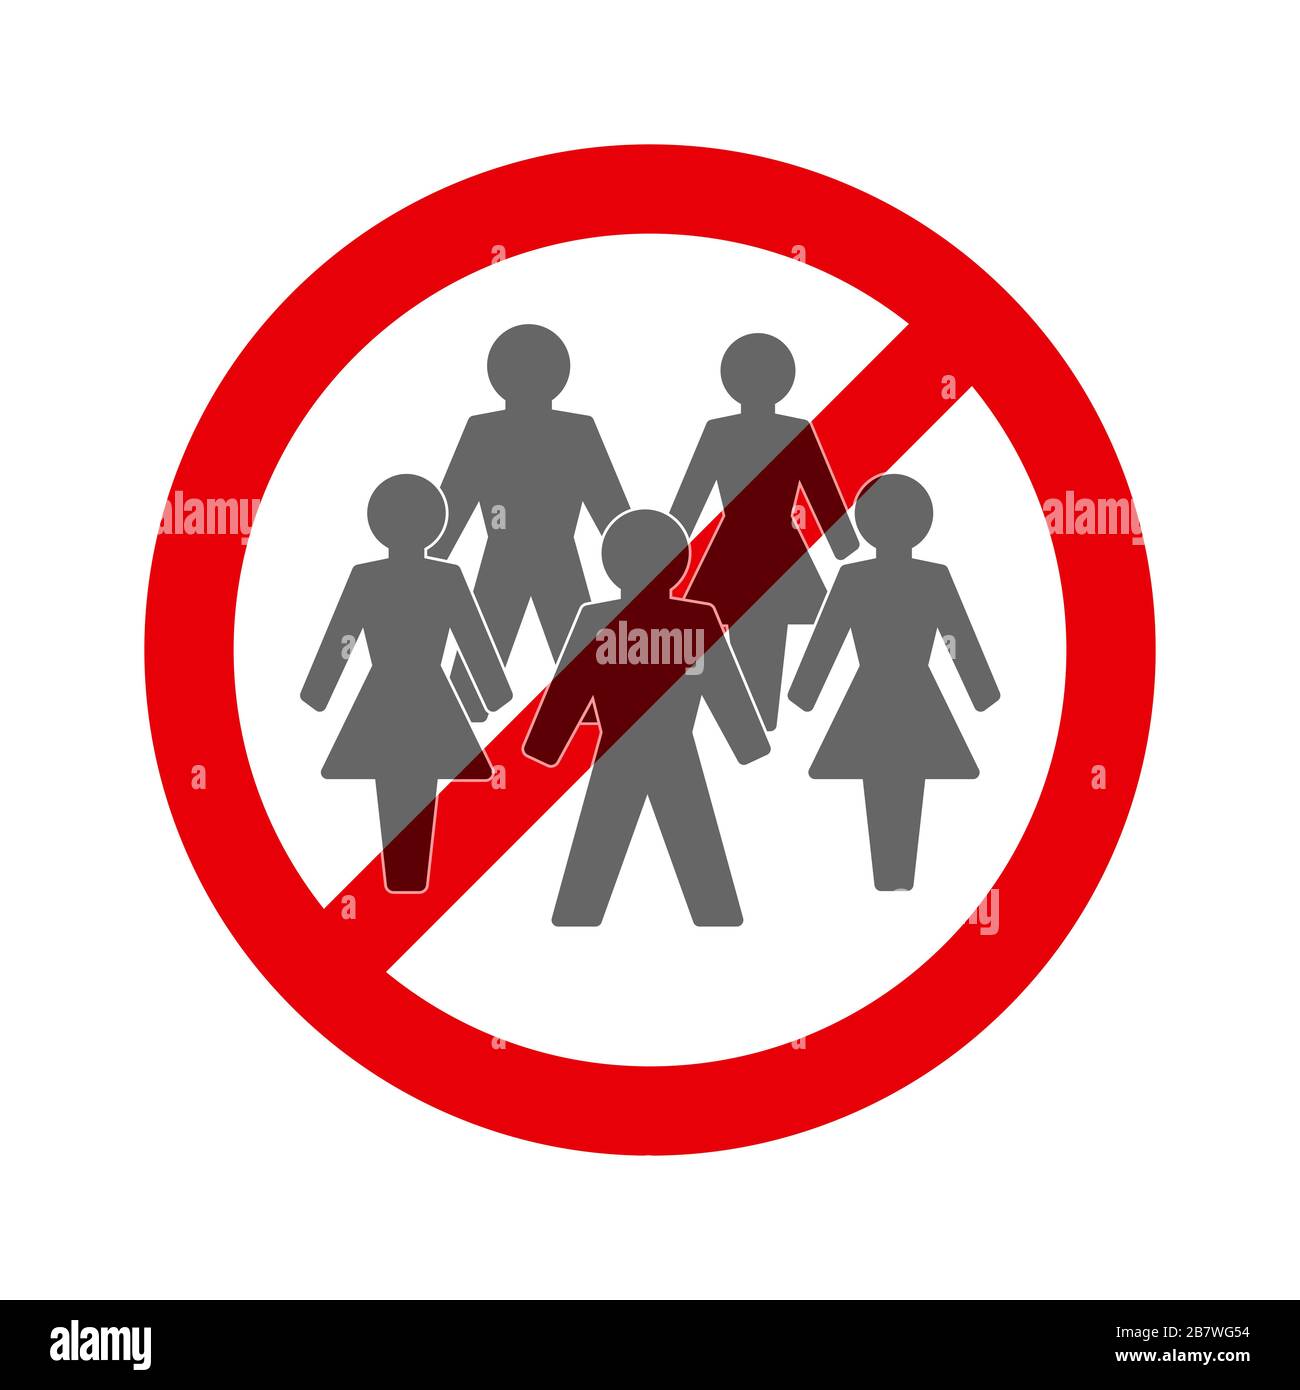 Social distancing. Ban on gathering symbol. Prohibition of assembly to avoid coronavirus infection - illustration on white background. Stock Photo